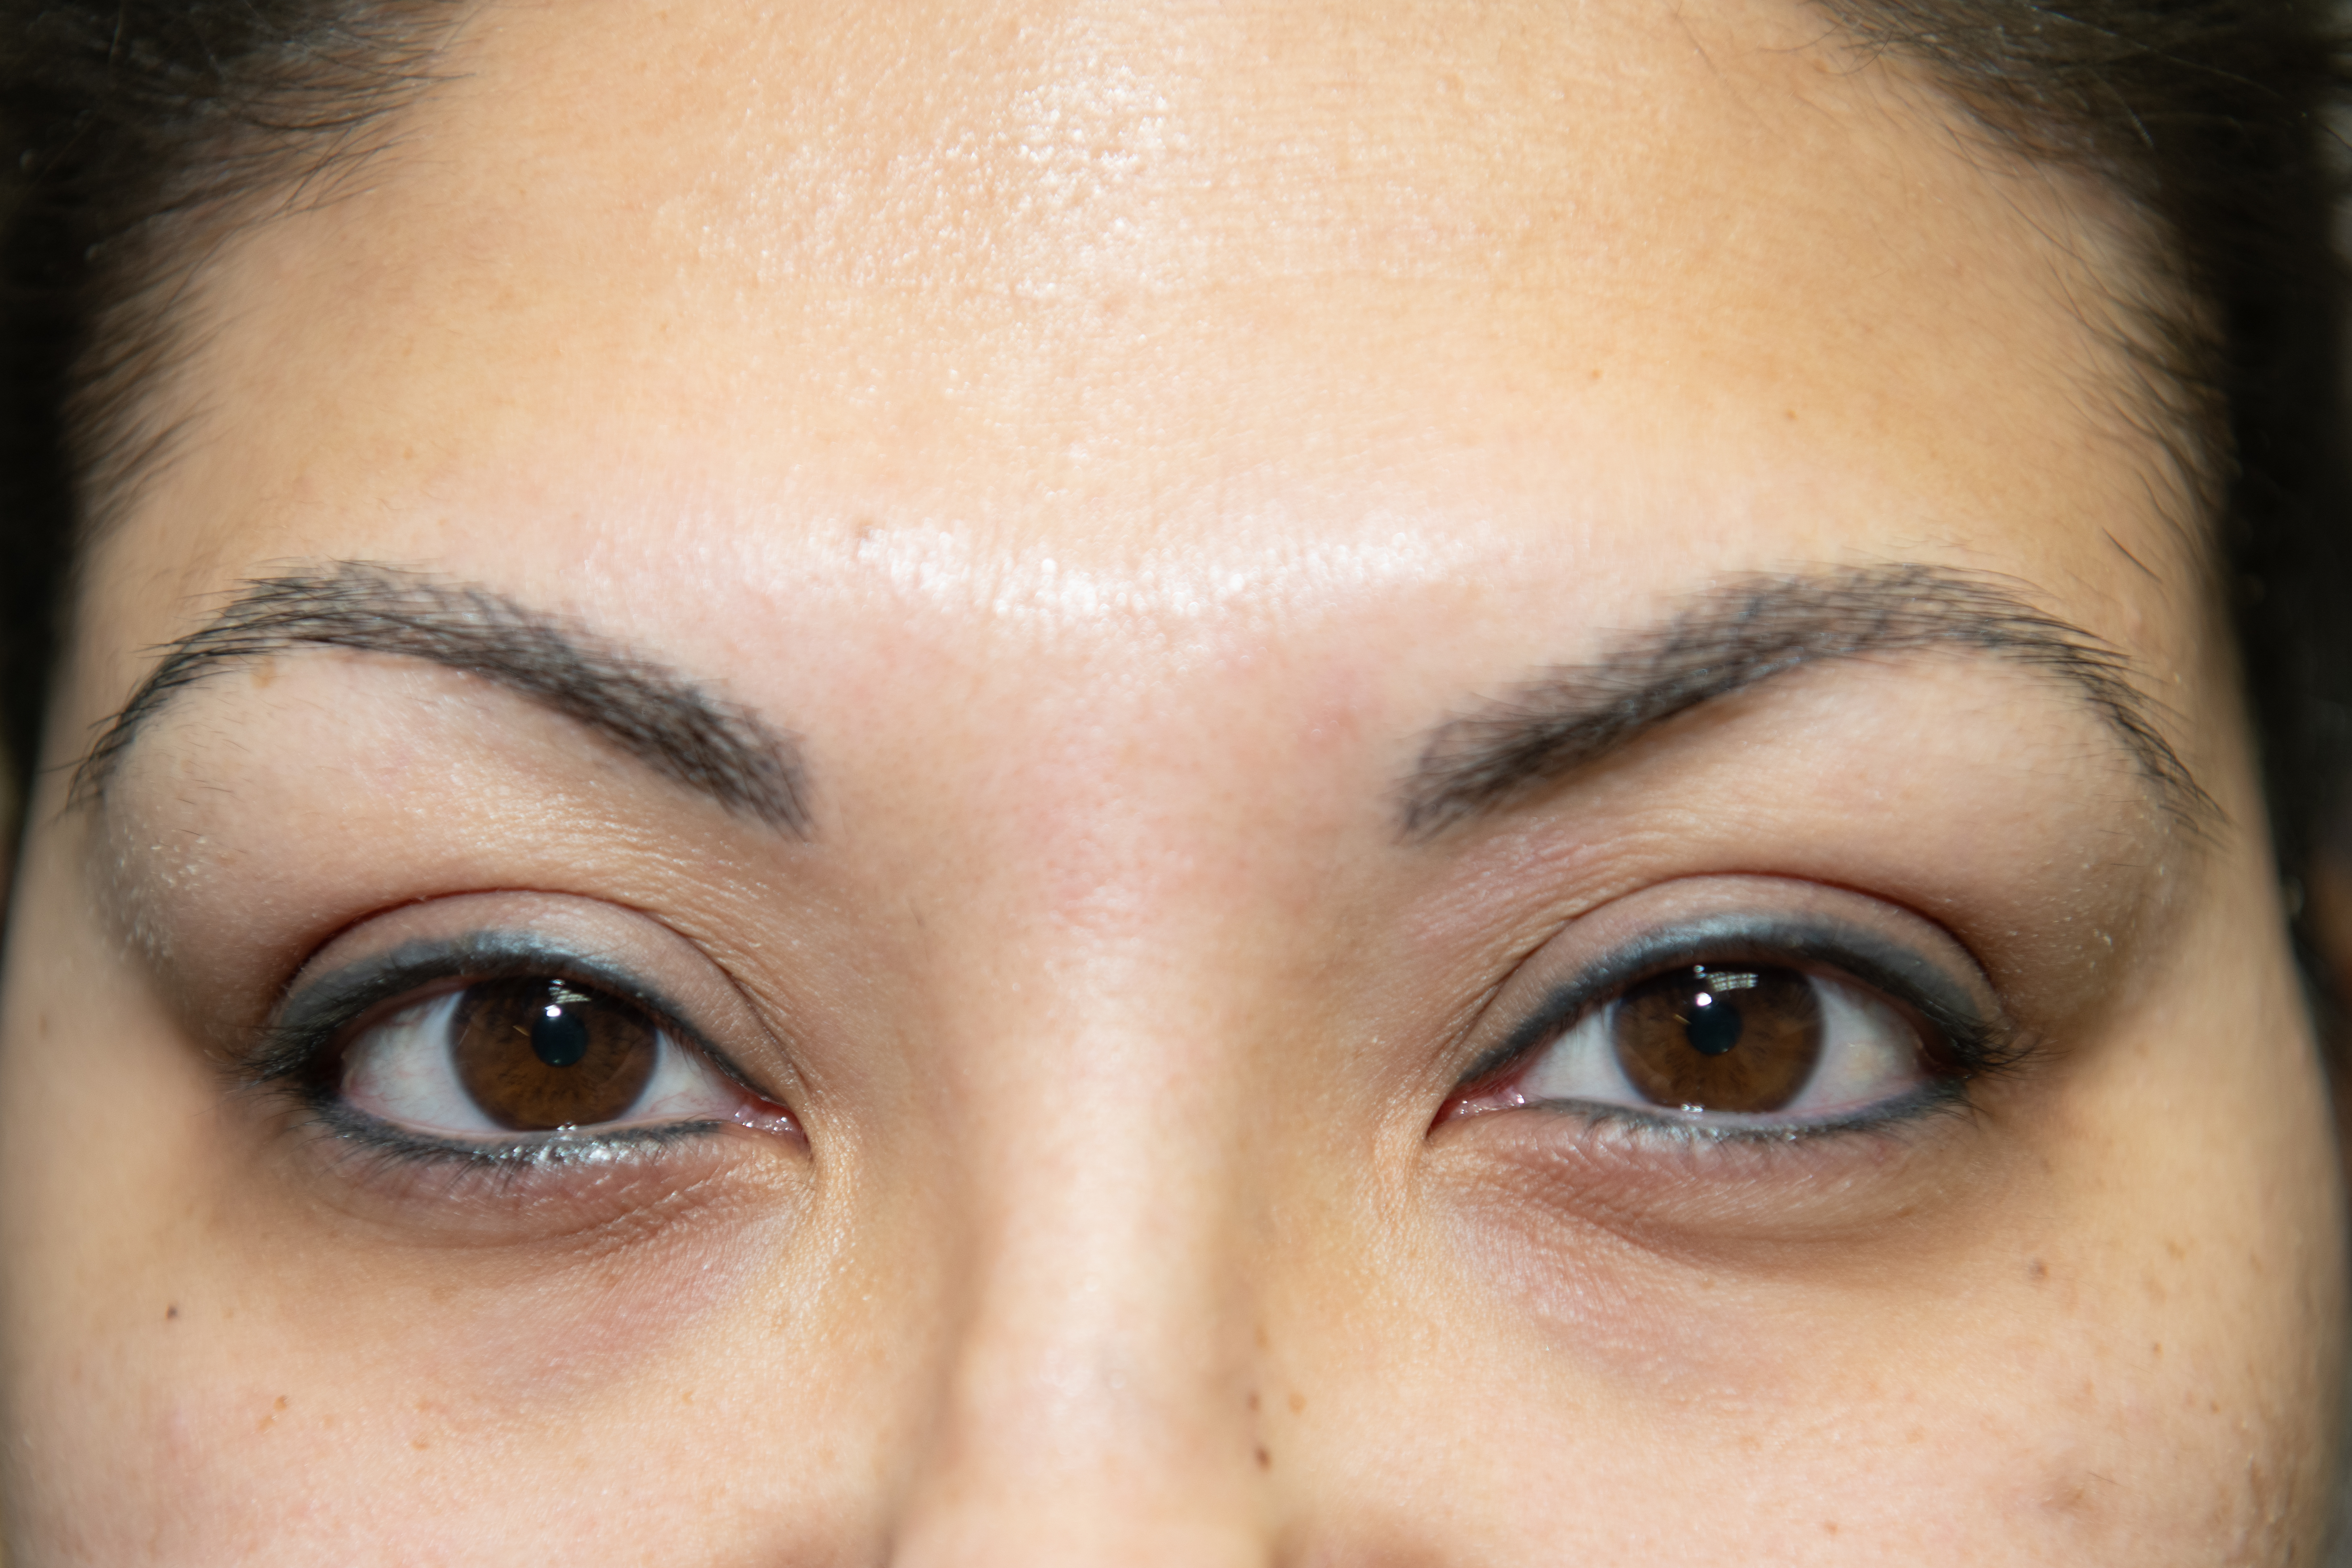 Her eyeliner is already in place but before eyebrows and after brows with brush-like strokes. It is much more permanent and beautiful to tattoo brush strokes than to subject yourself to semi-permanent micro-blading procedures